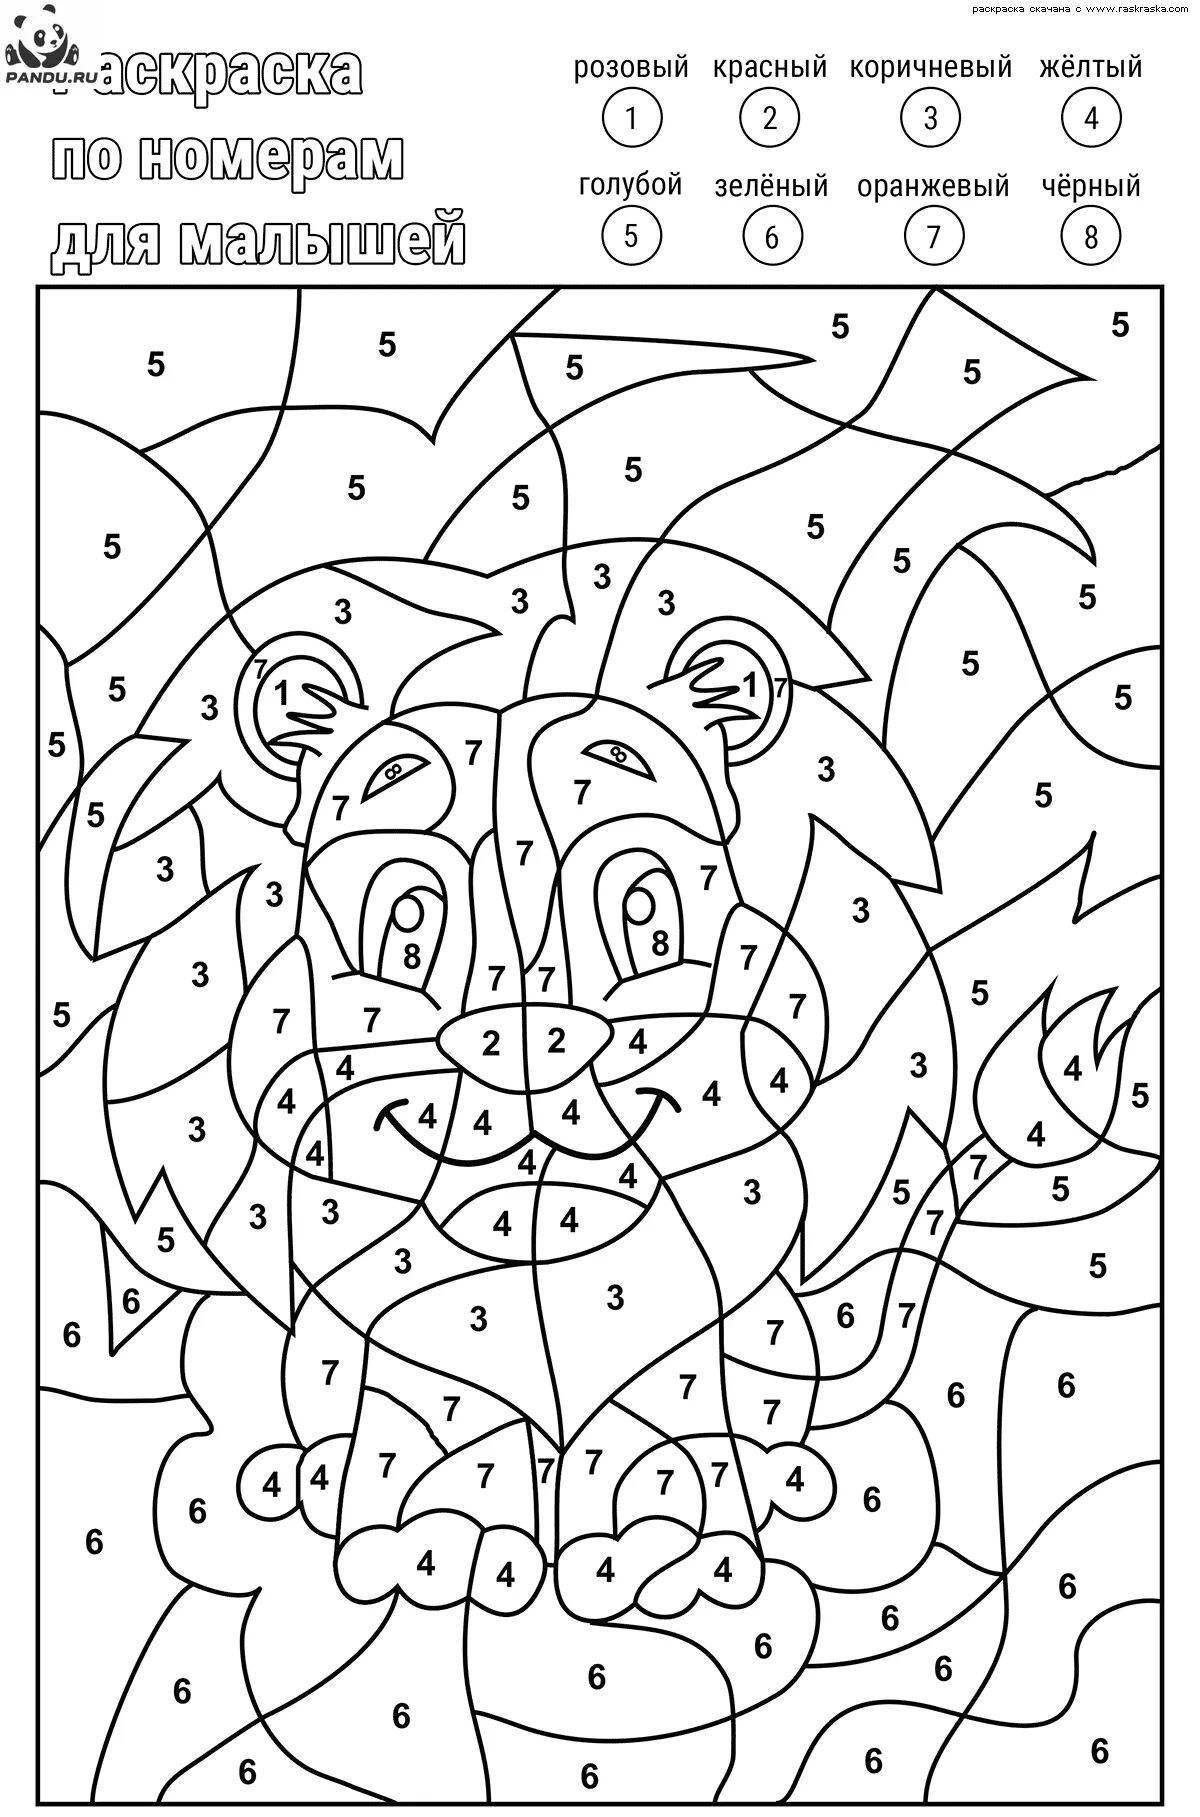 Fun coloring by number squares